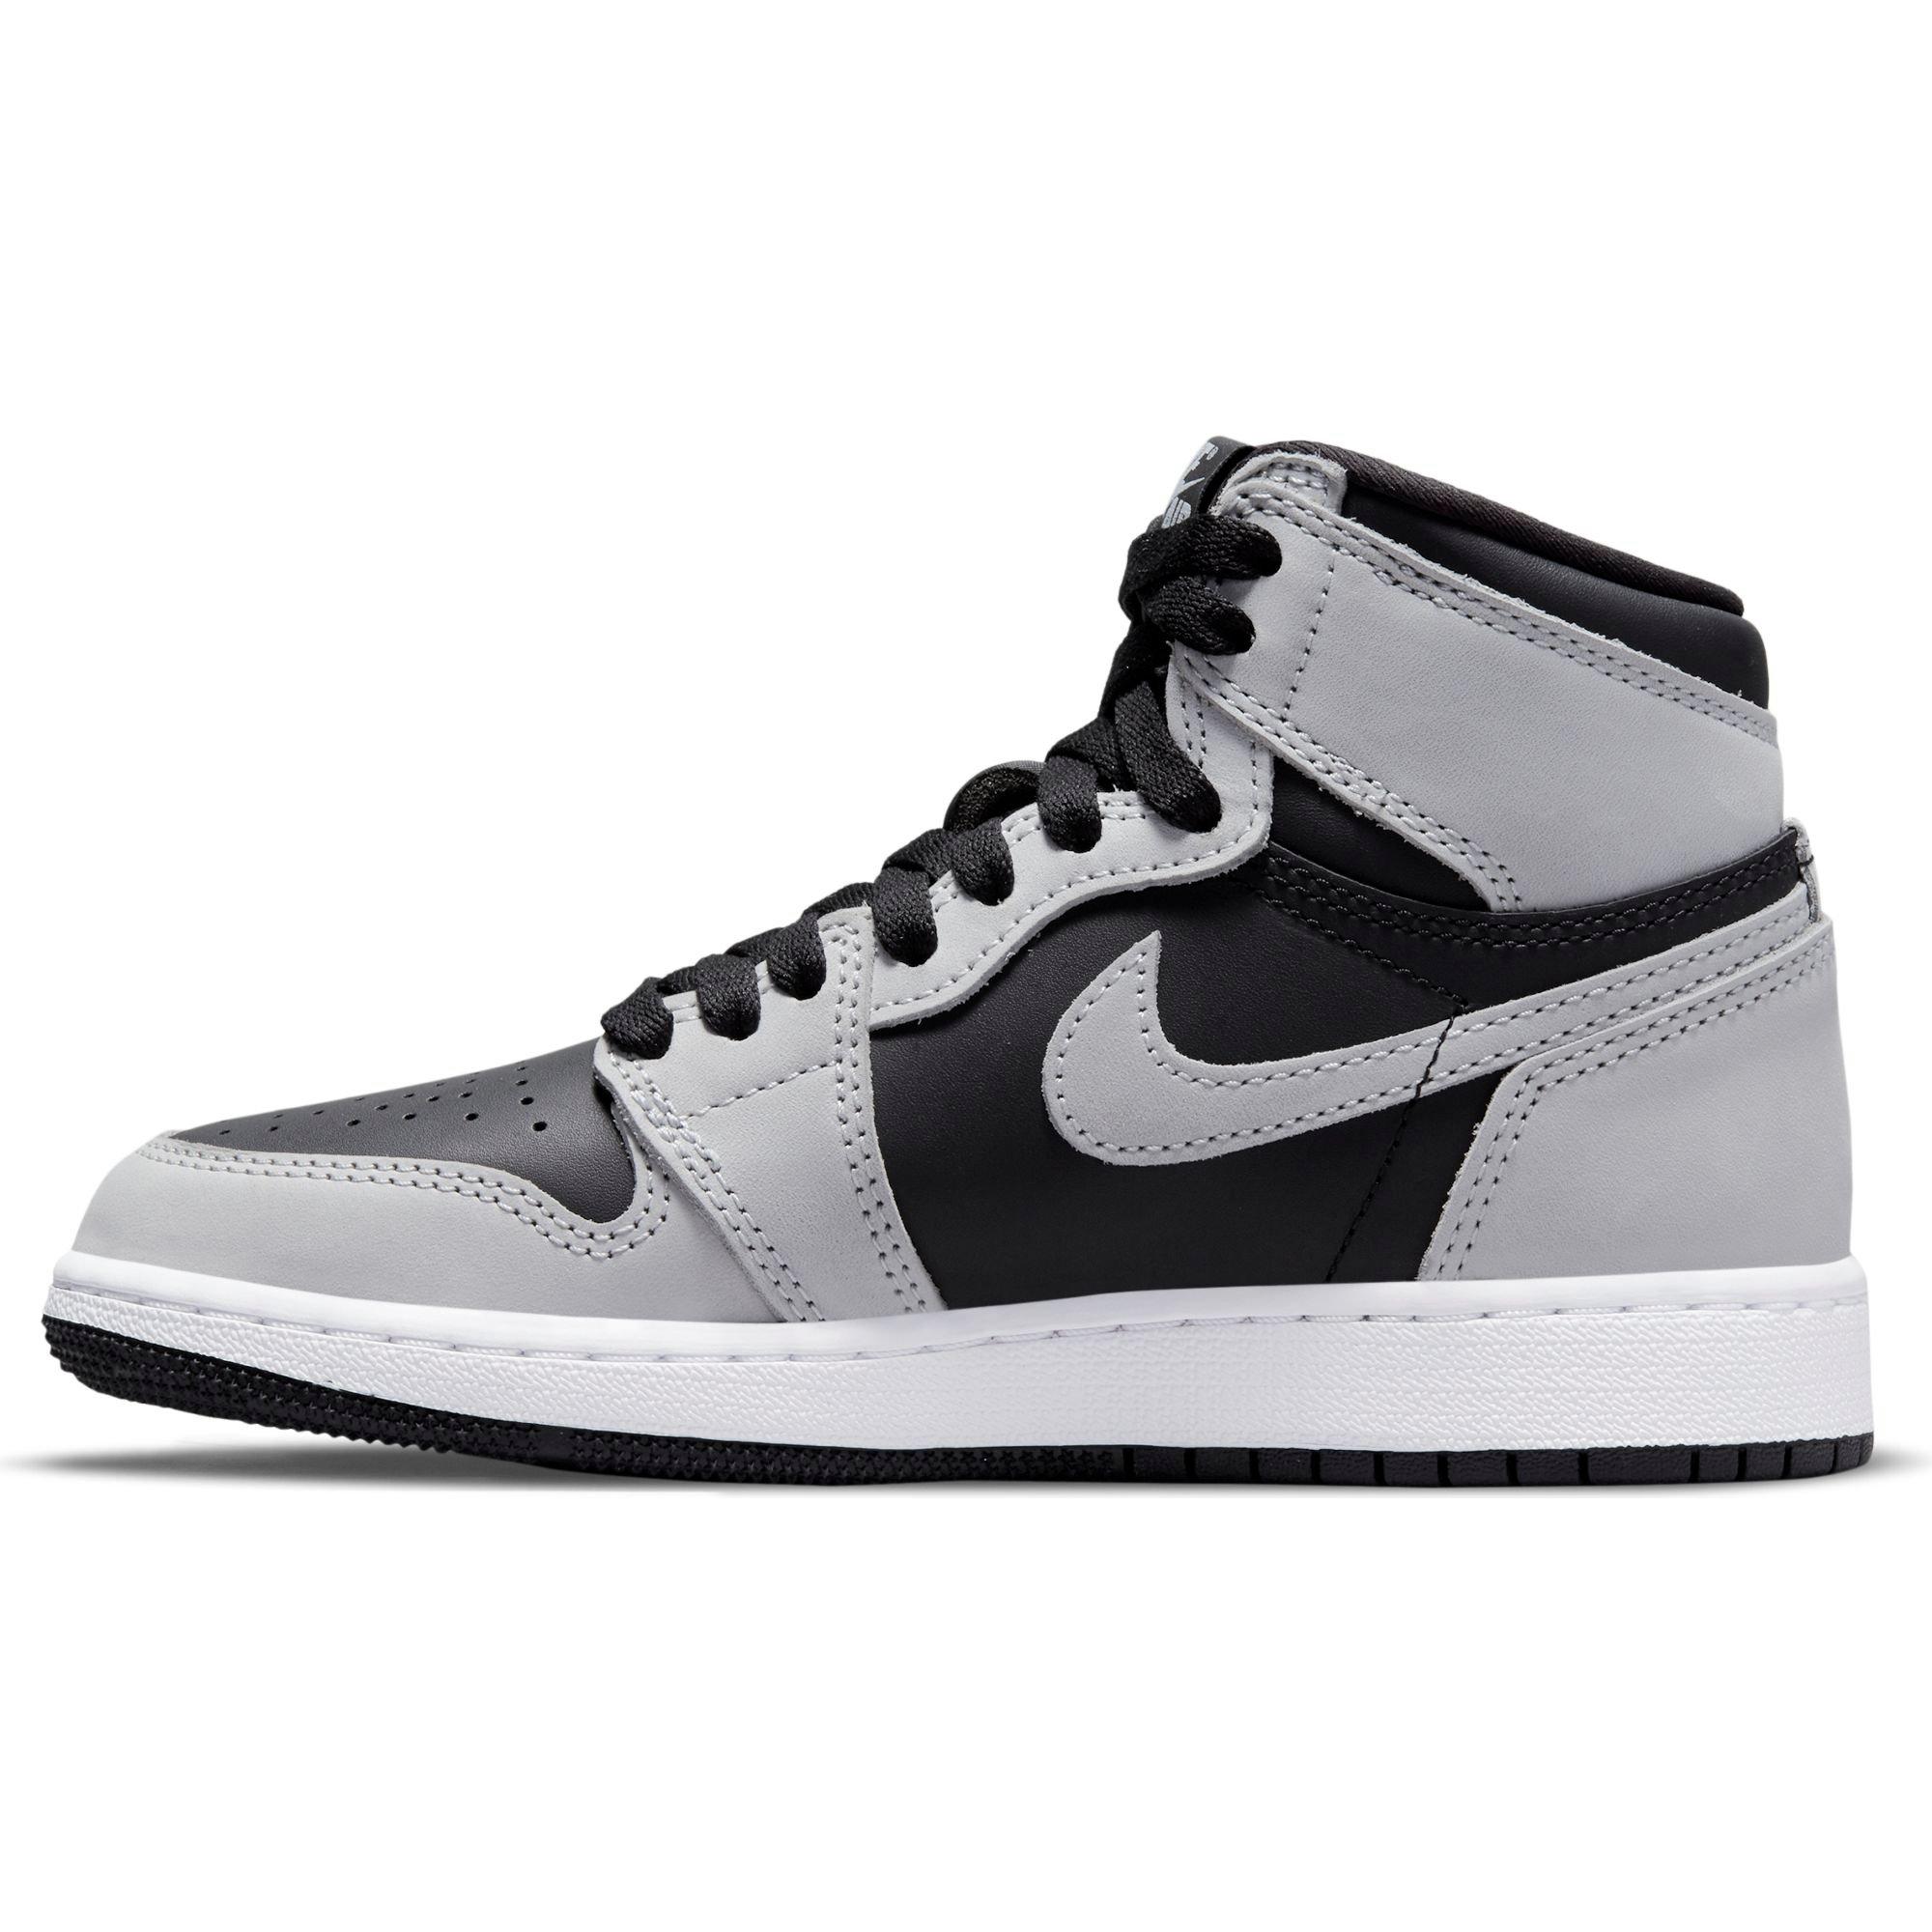 grey and white and black jordan 1s